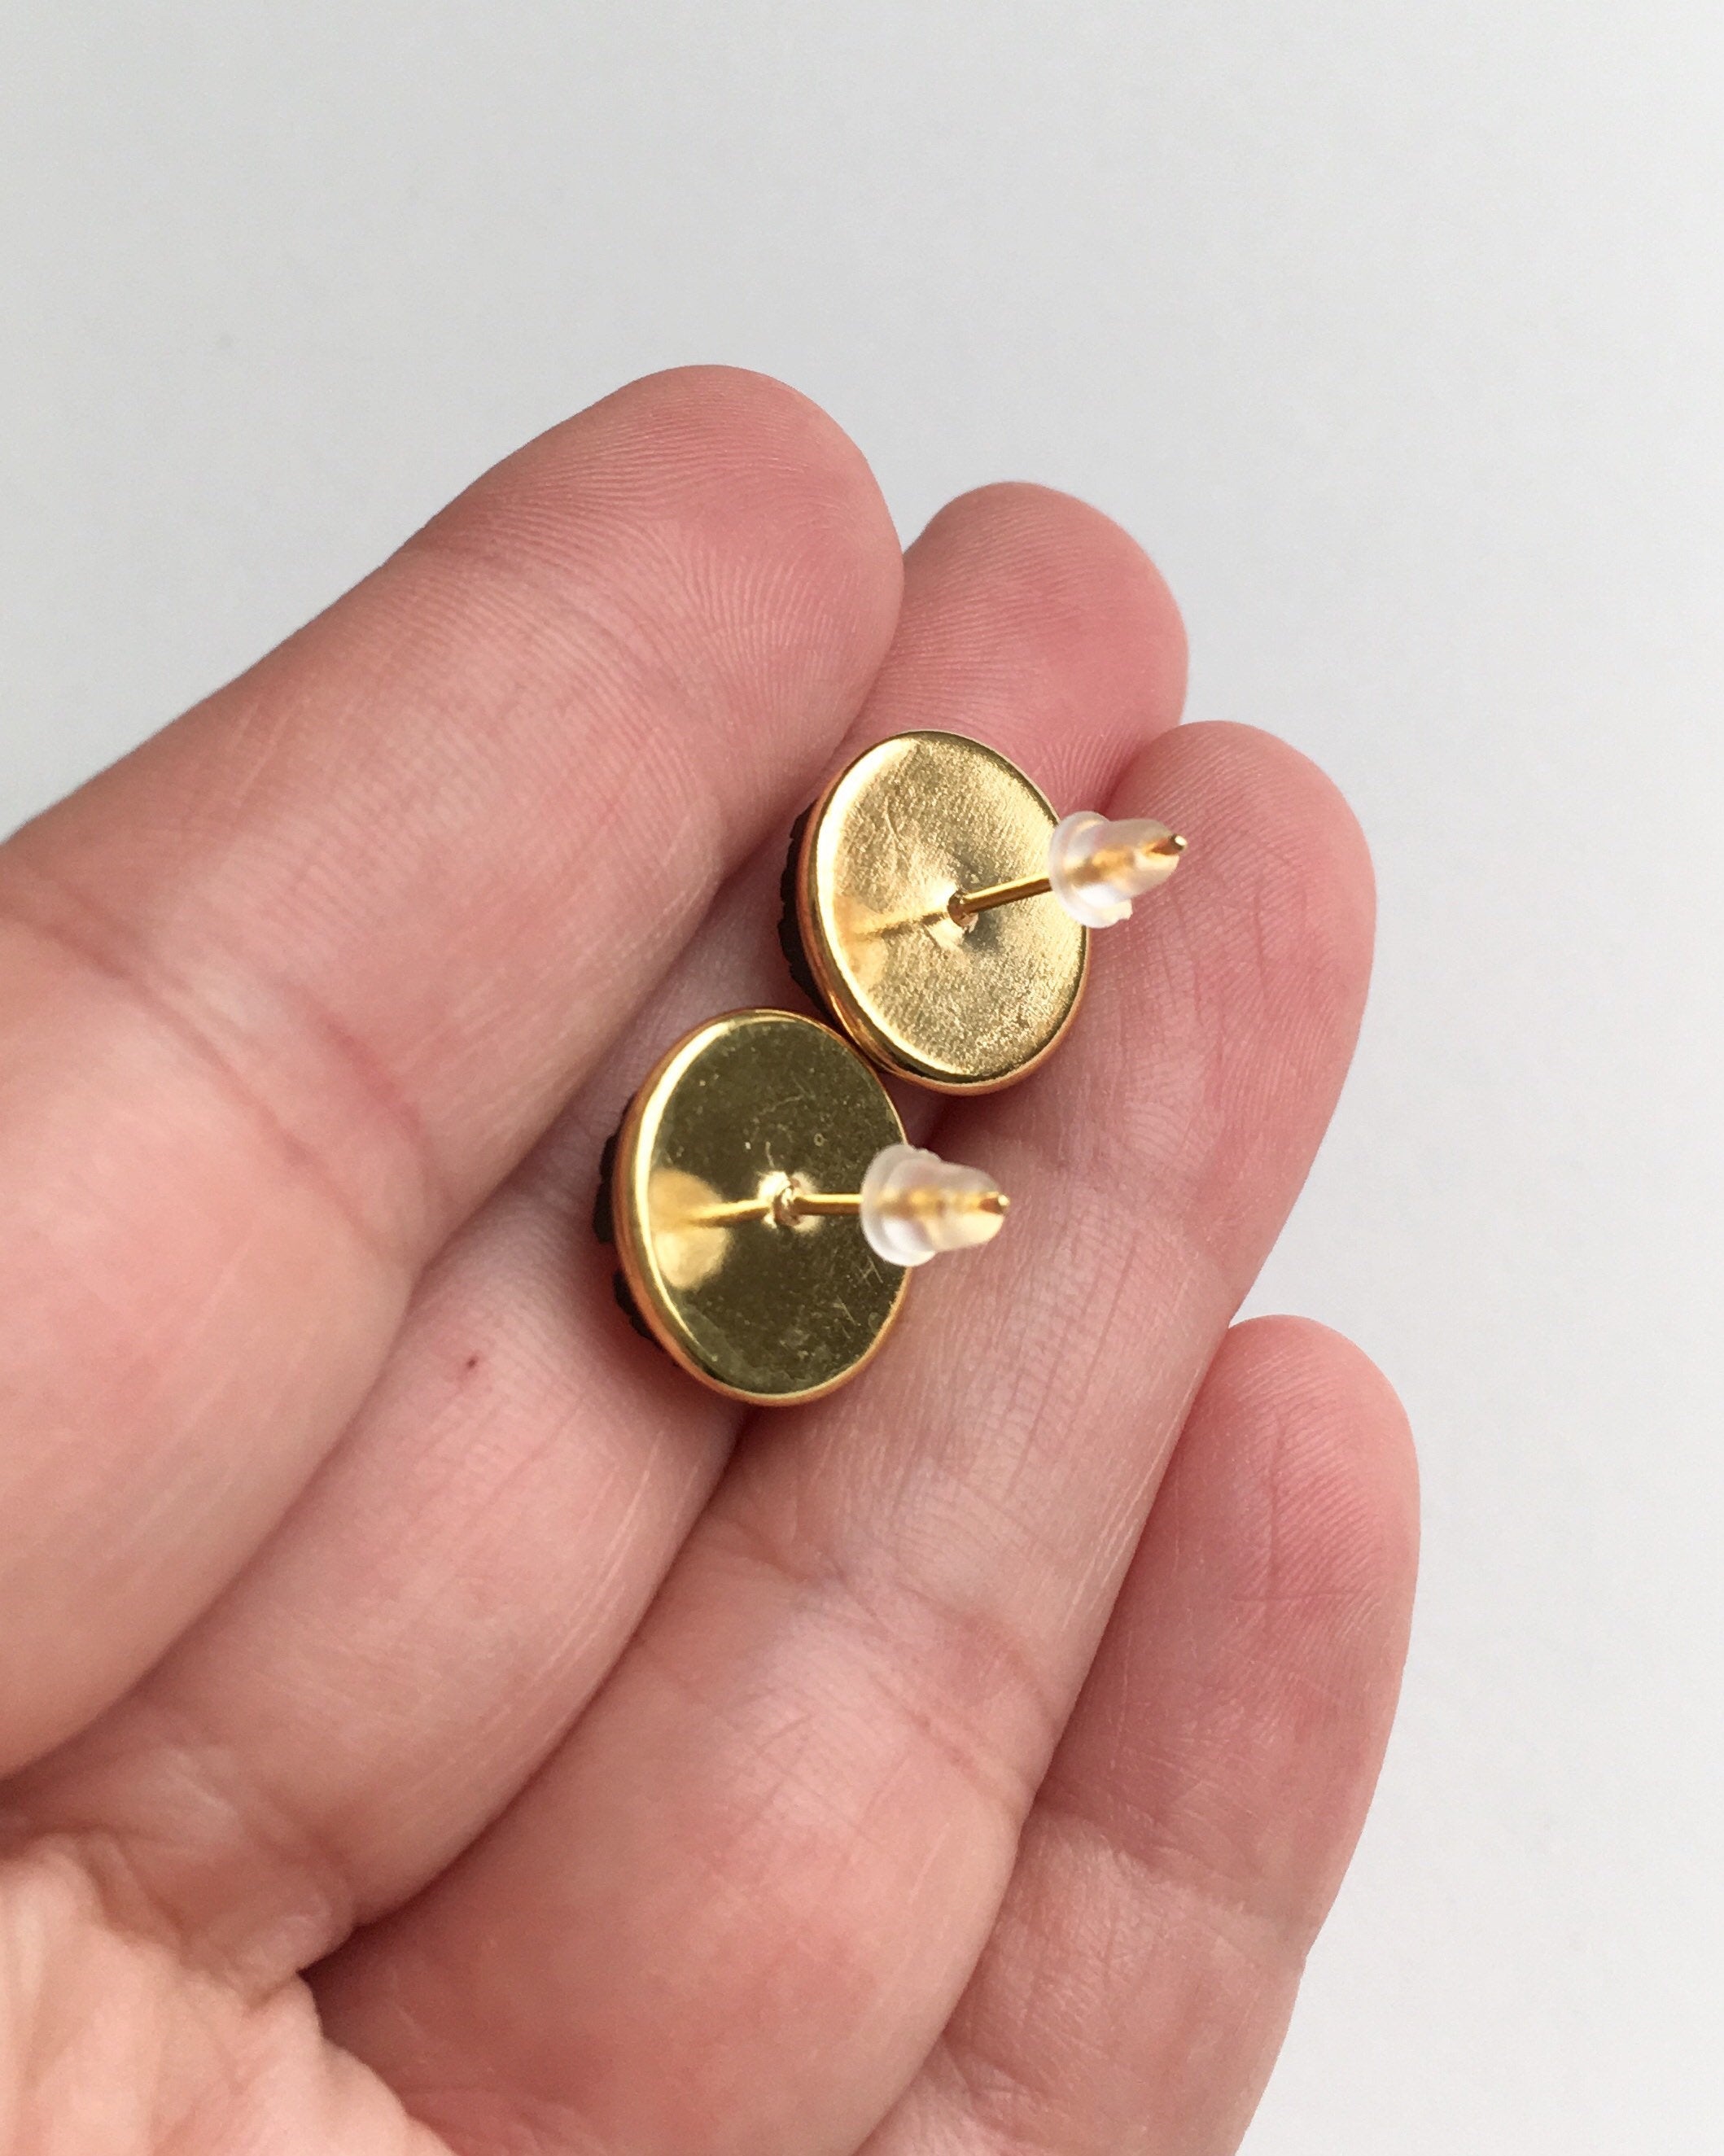 Hand holding gold setting stud earrings with rubber push back.